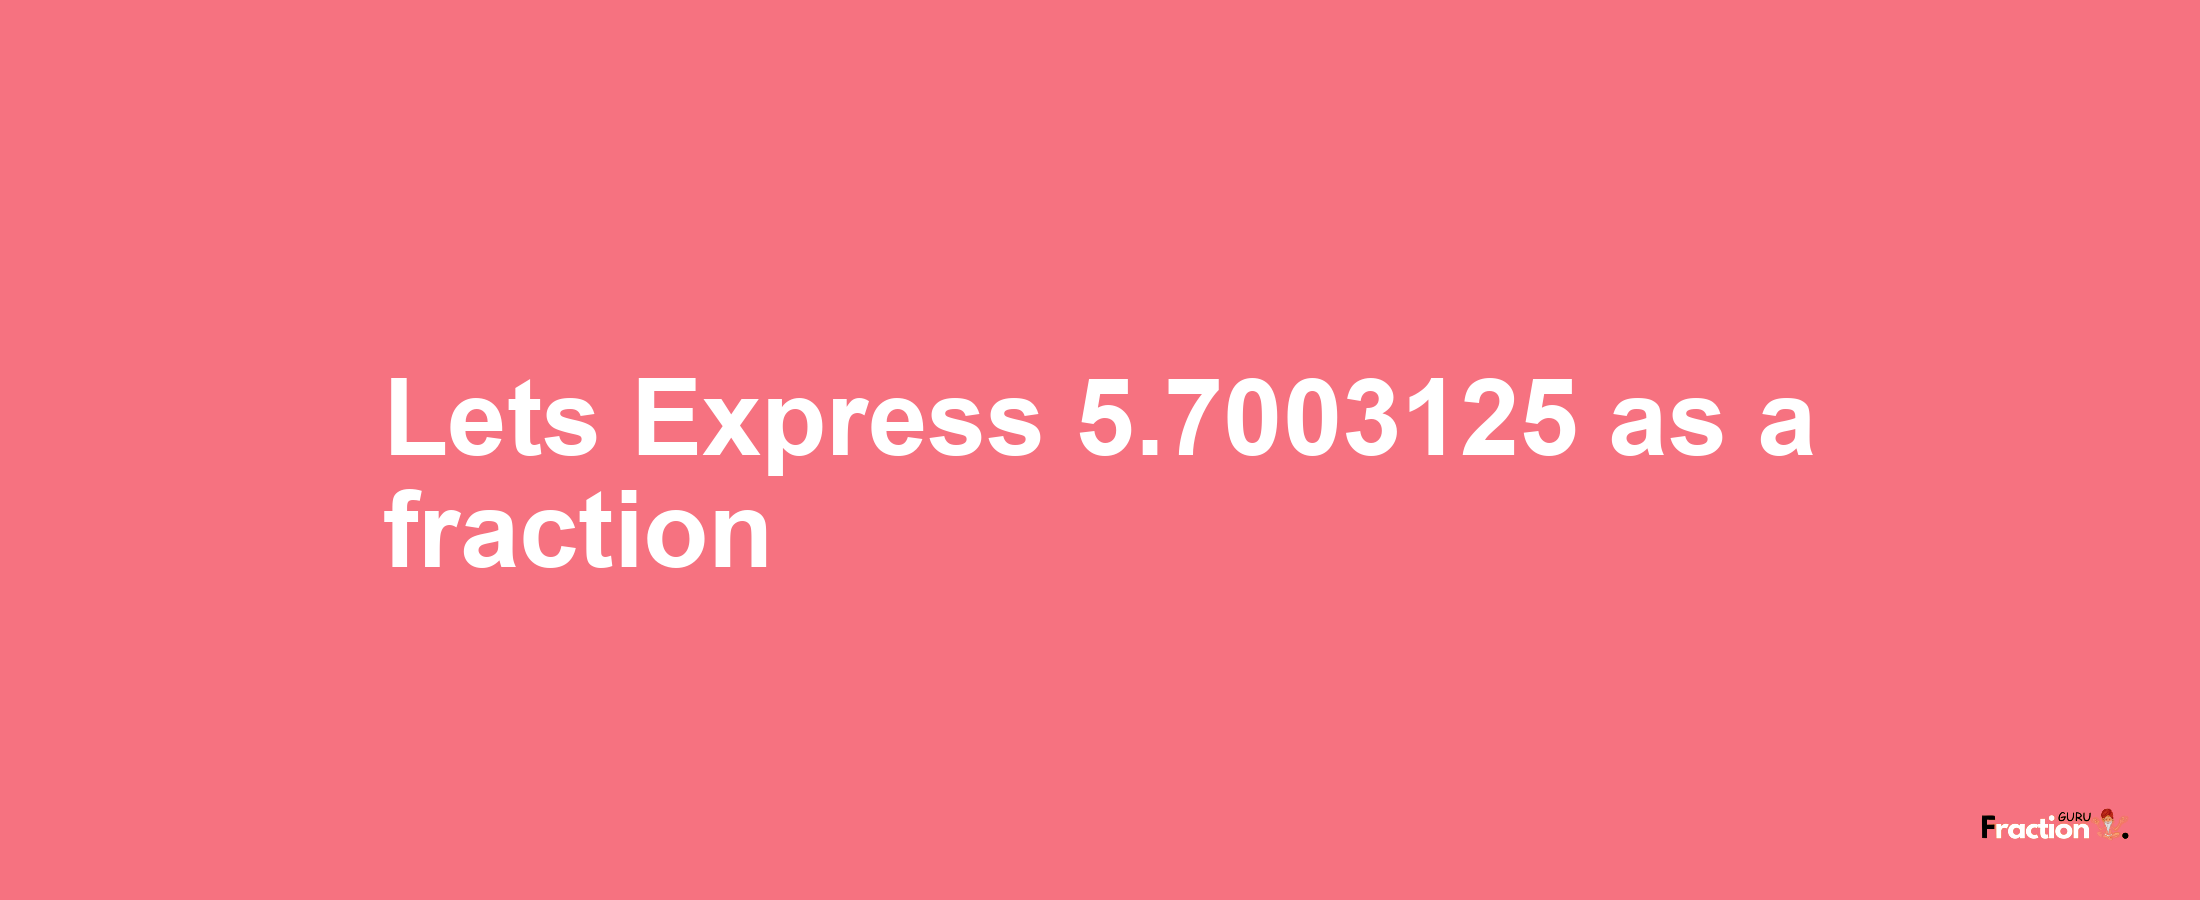 Lets Express 5.7003125 as afraction